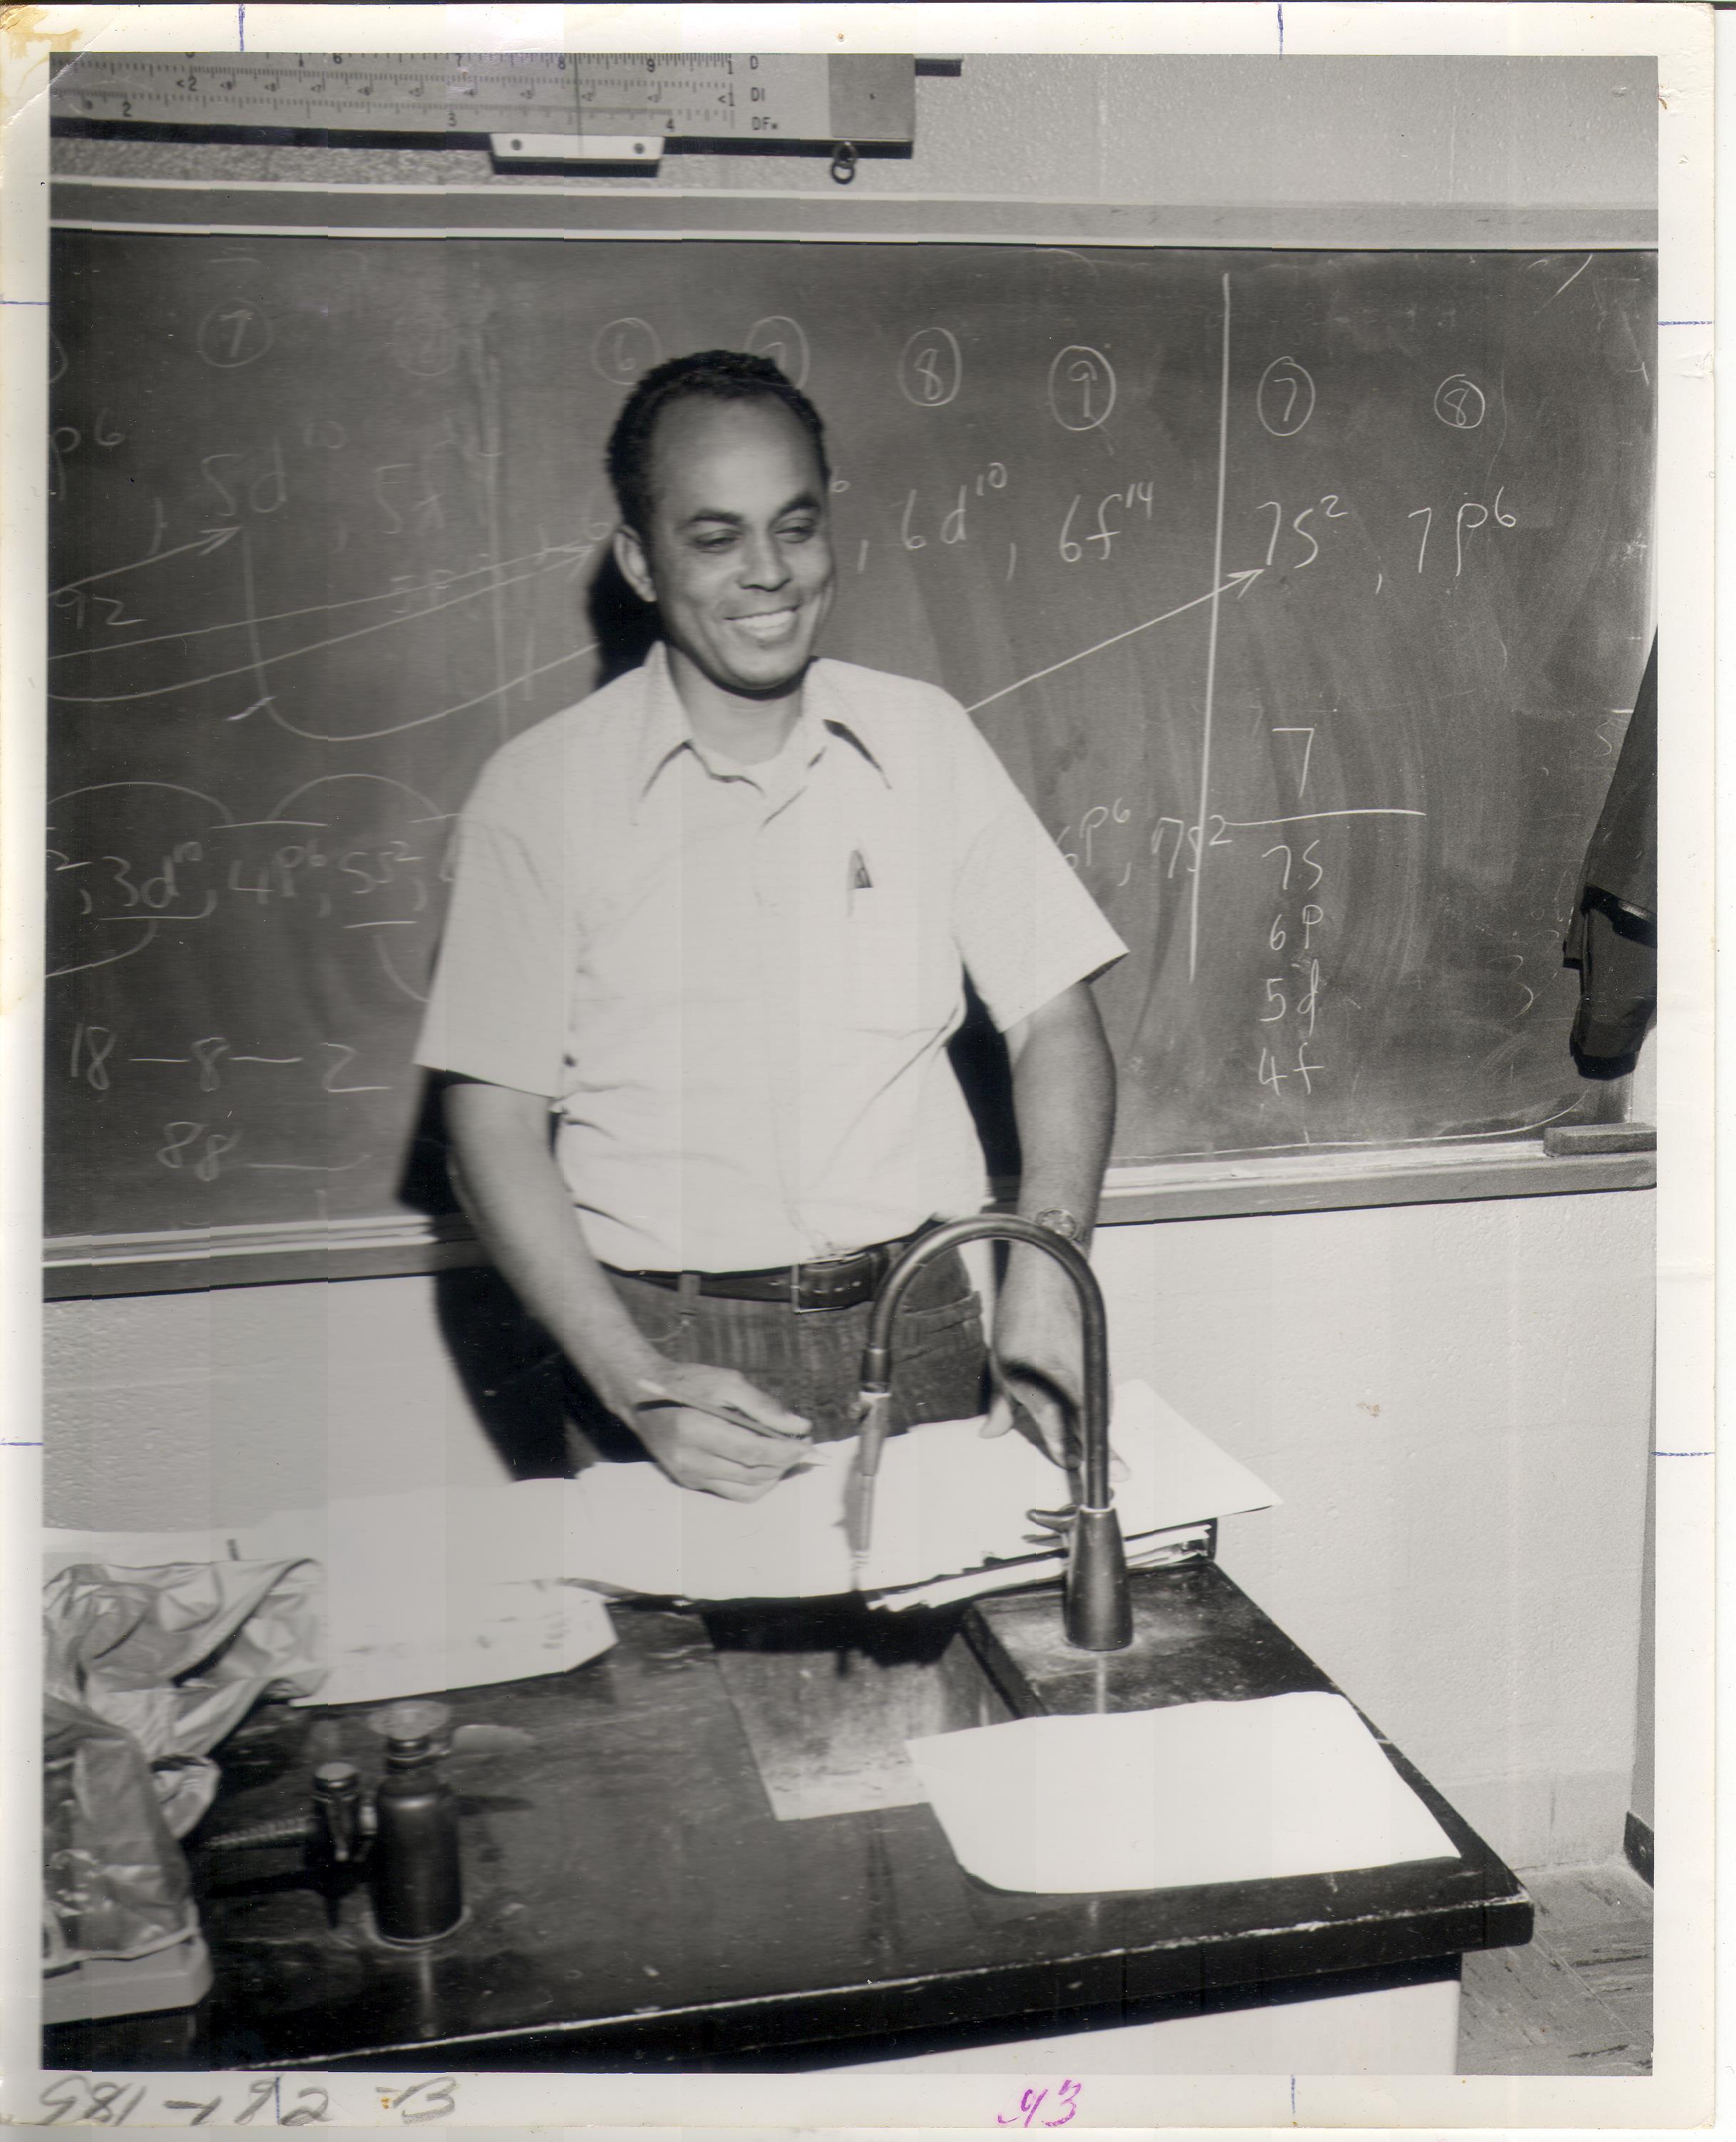 Rufus G. Kelly, Jr., father of FCPS employee Rick Kelly, was a high school chemistry teacher who inspired Rick to consider a career in education.